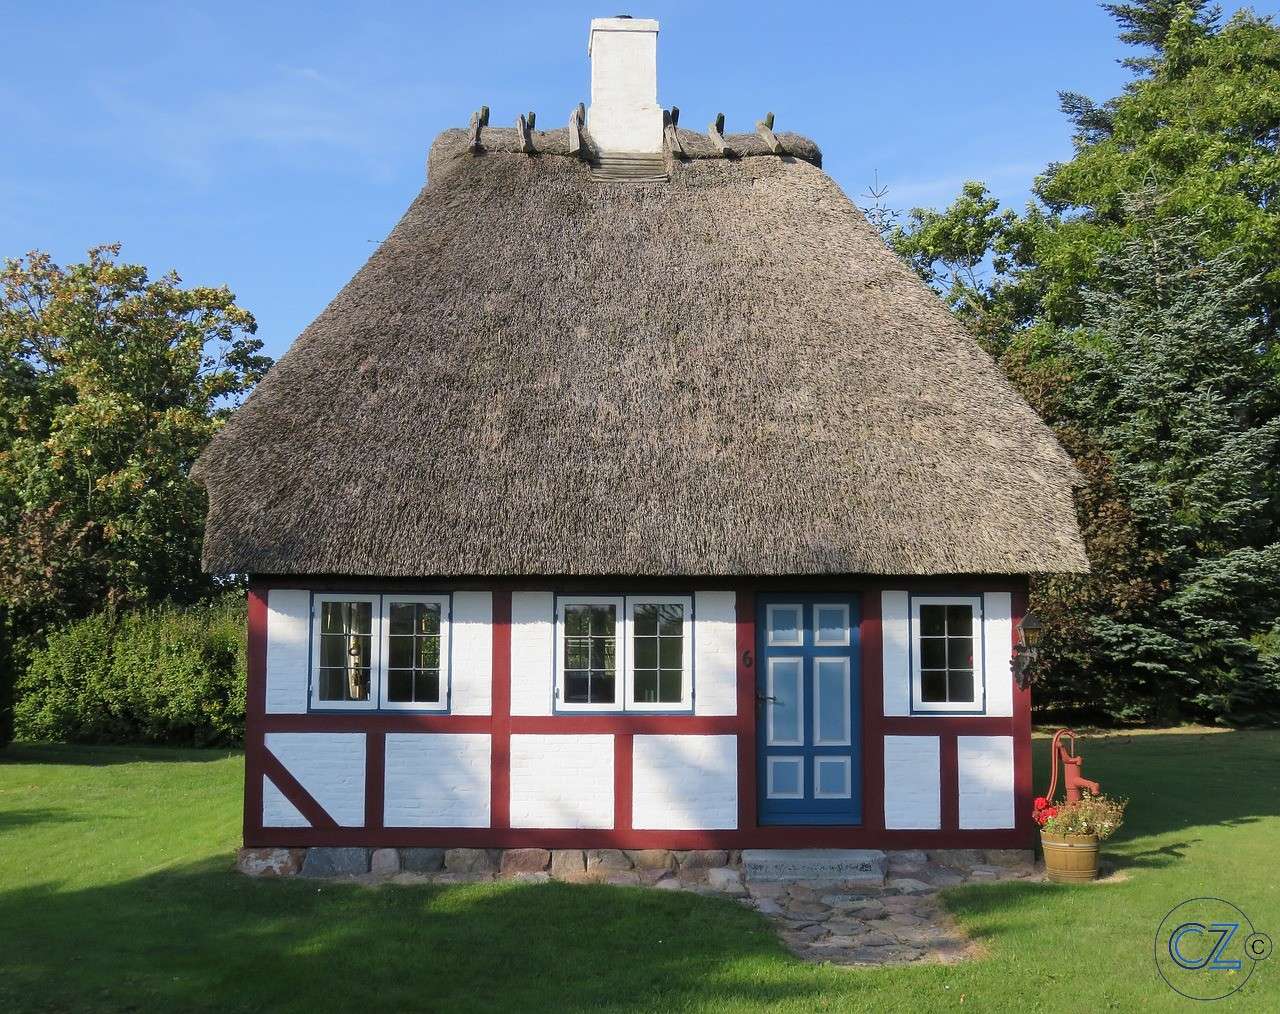 Denmark, Small half-timbered house jigsaw puzzle online